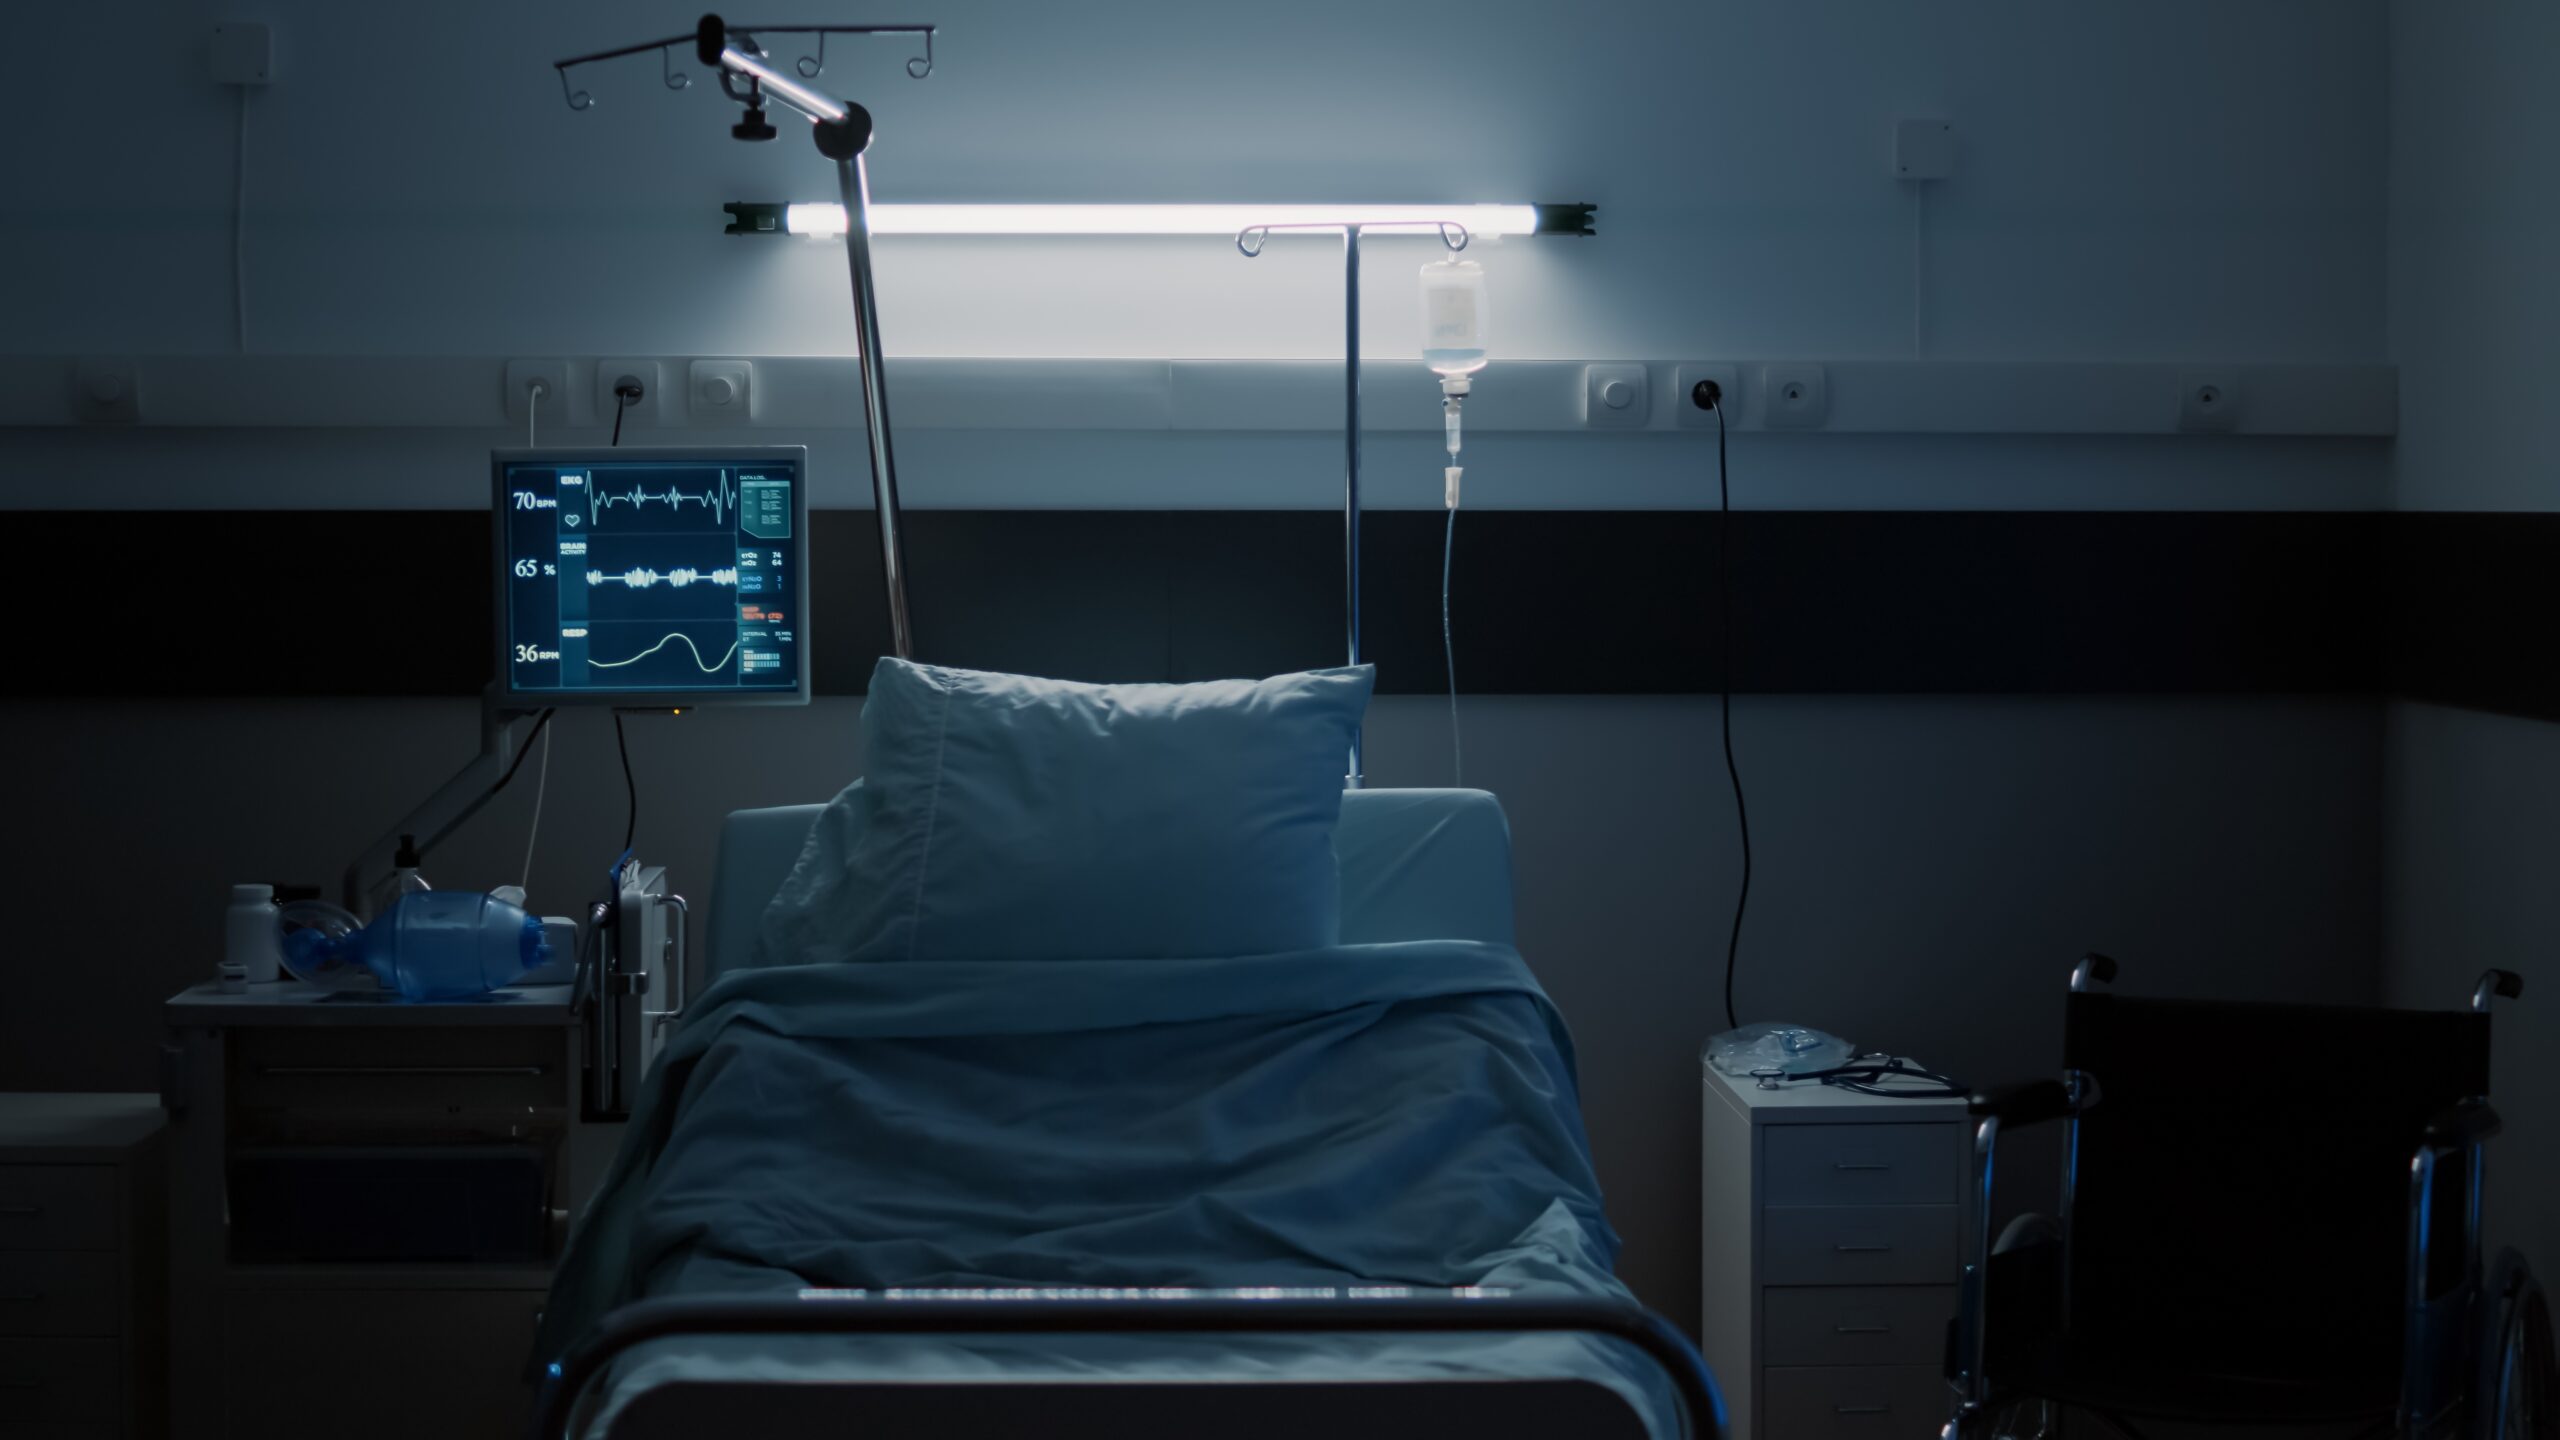 An empty hospital bed in a dimly lit room.